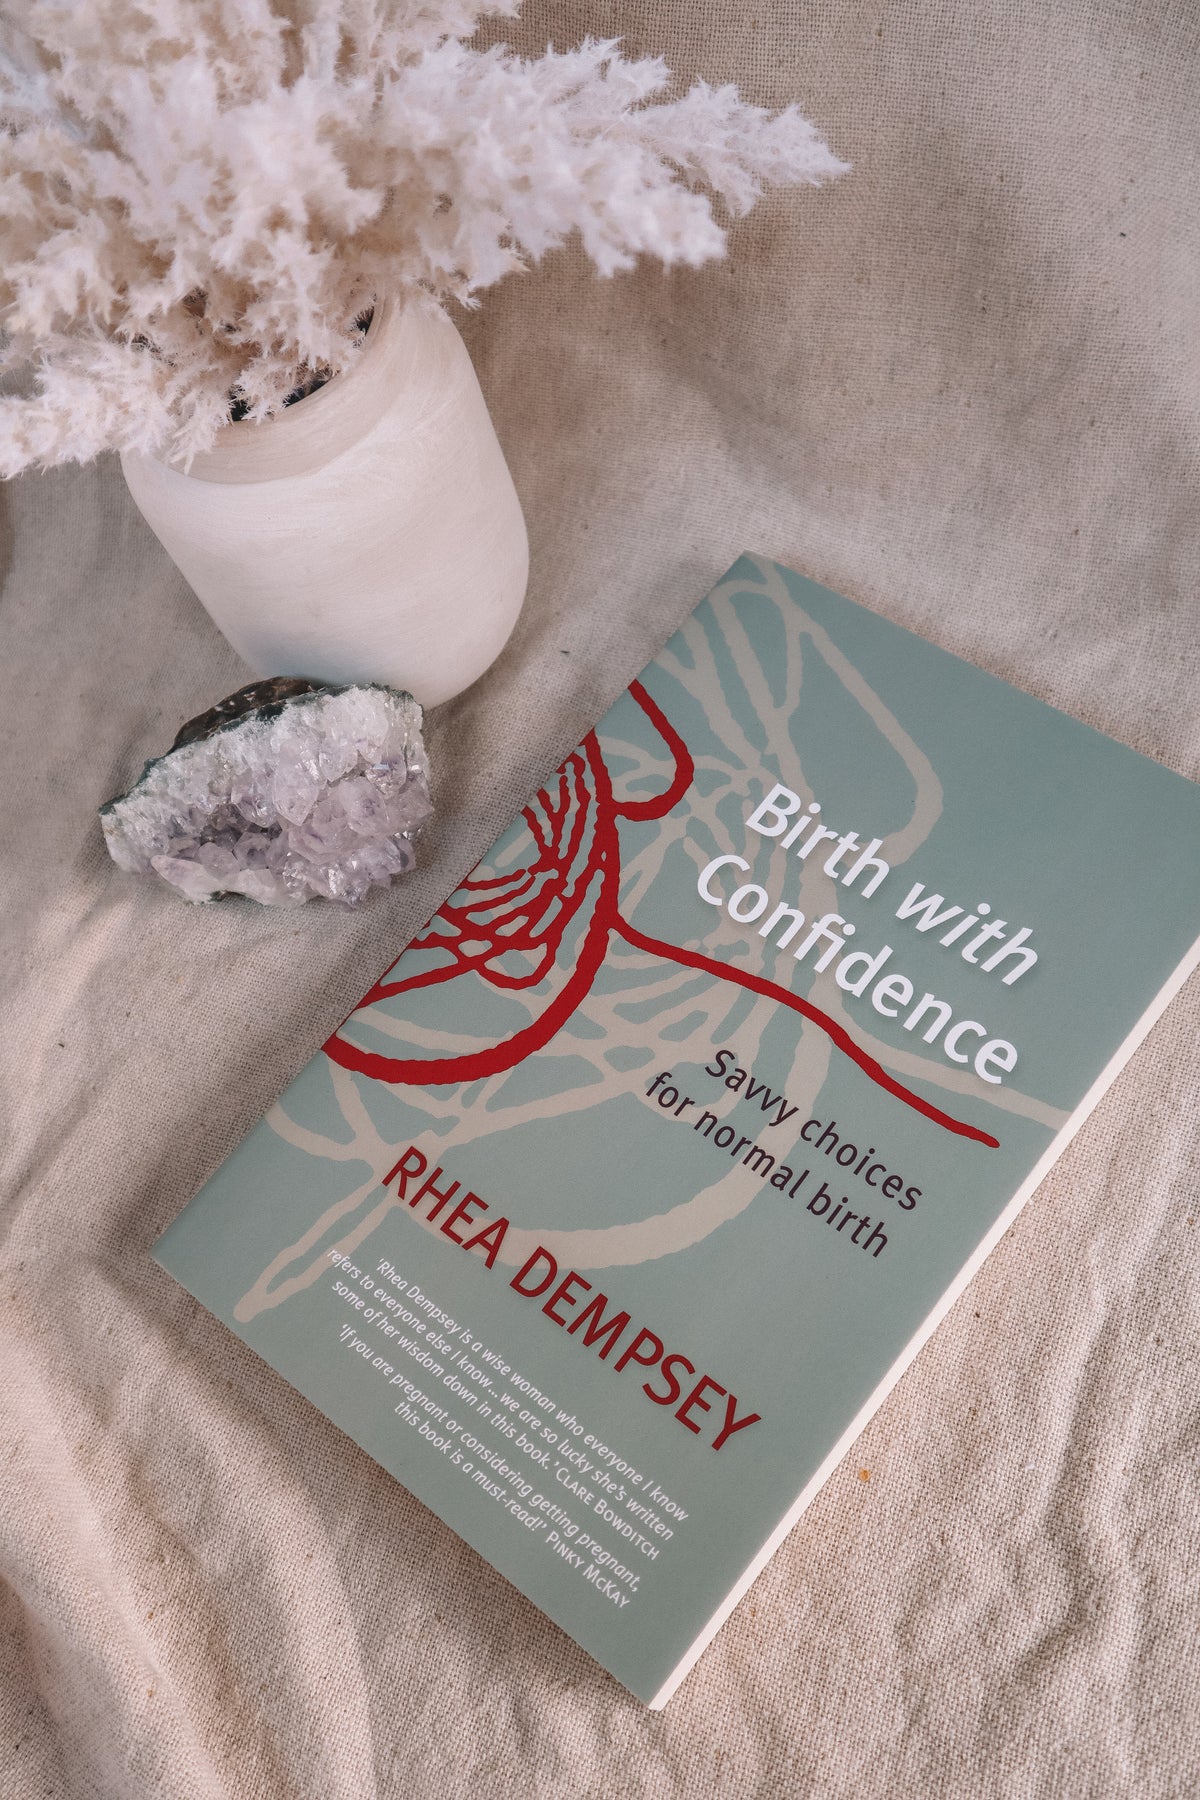 Birth with Confidence by Rhea Dempsey